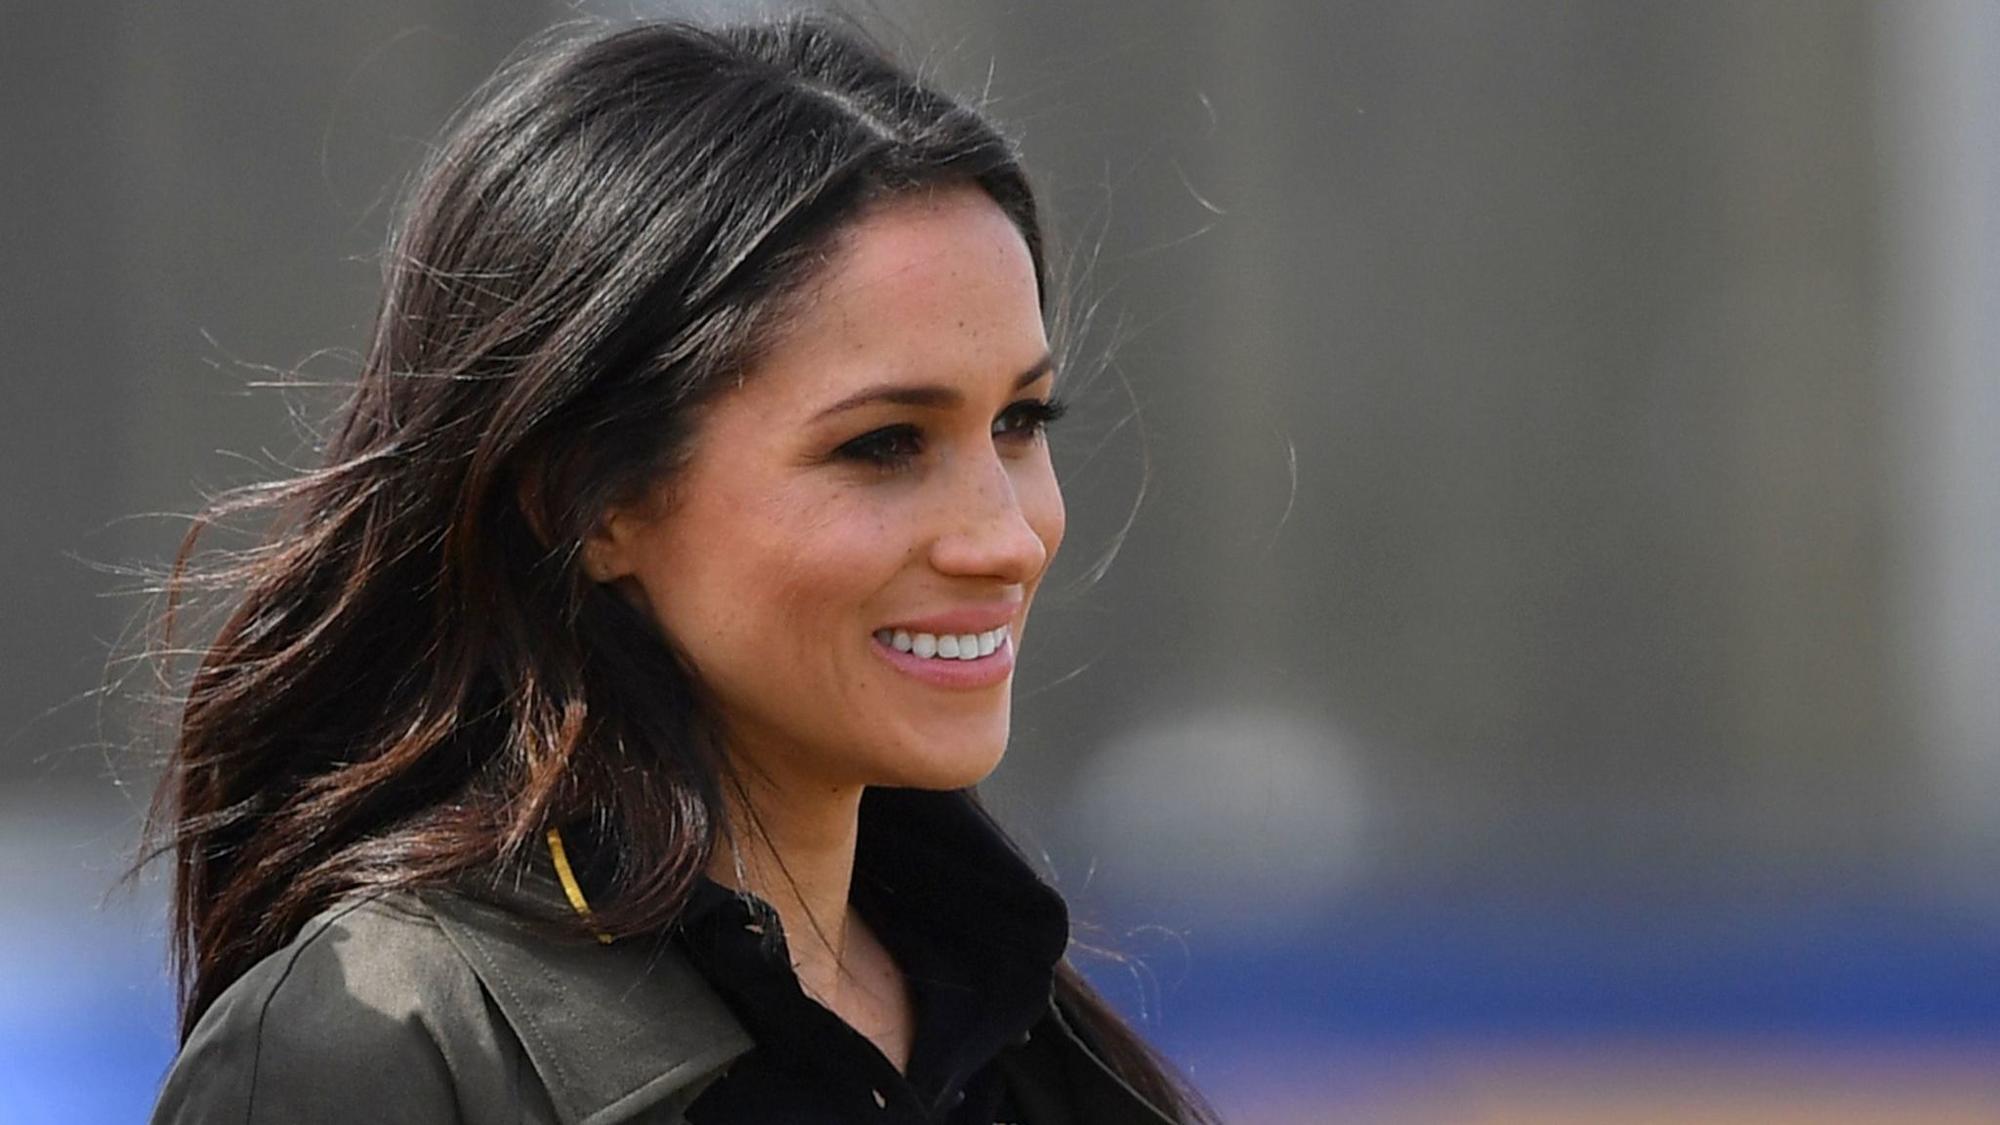 Sources Meghan Markle Spotted In Chicago Weeks Before Royal Wedding 